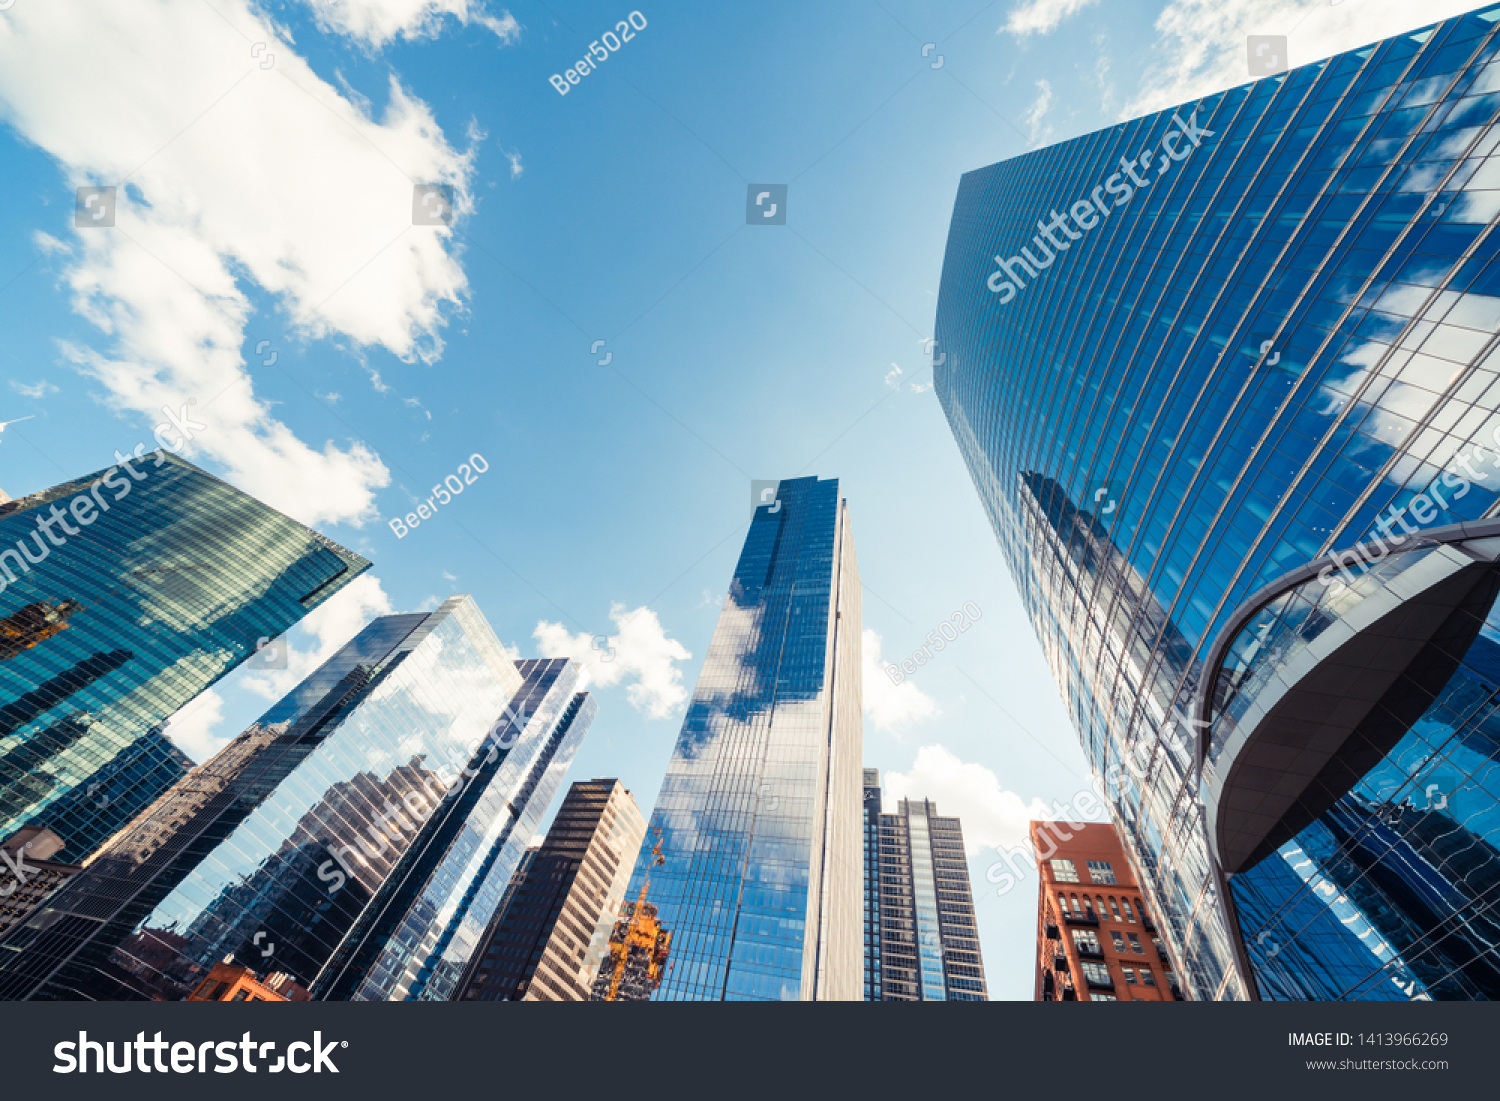 Modern tower buildings or skyscrapers in financial district with cloud on sunny day in Chicago, USA. Construction industry, business enterprise organization, or communication technology concept #1413966269